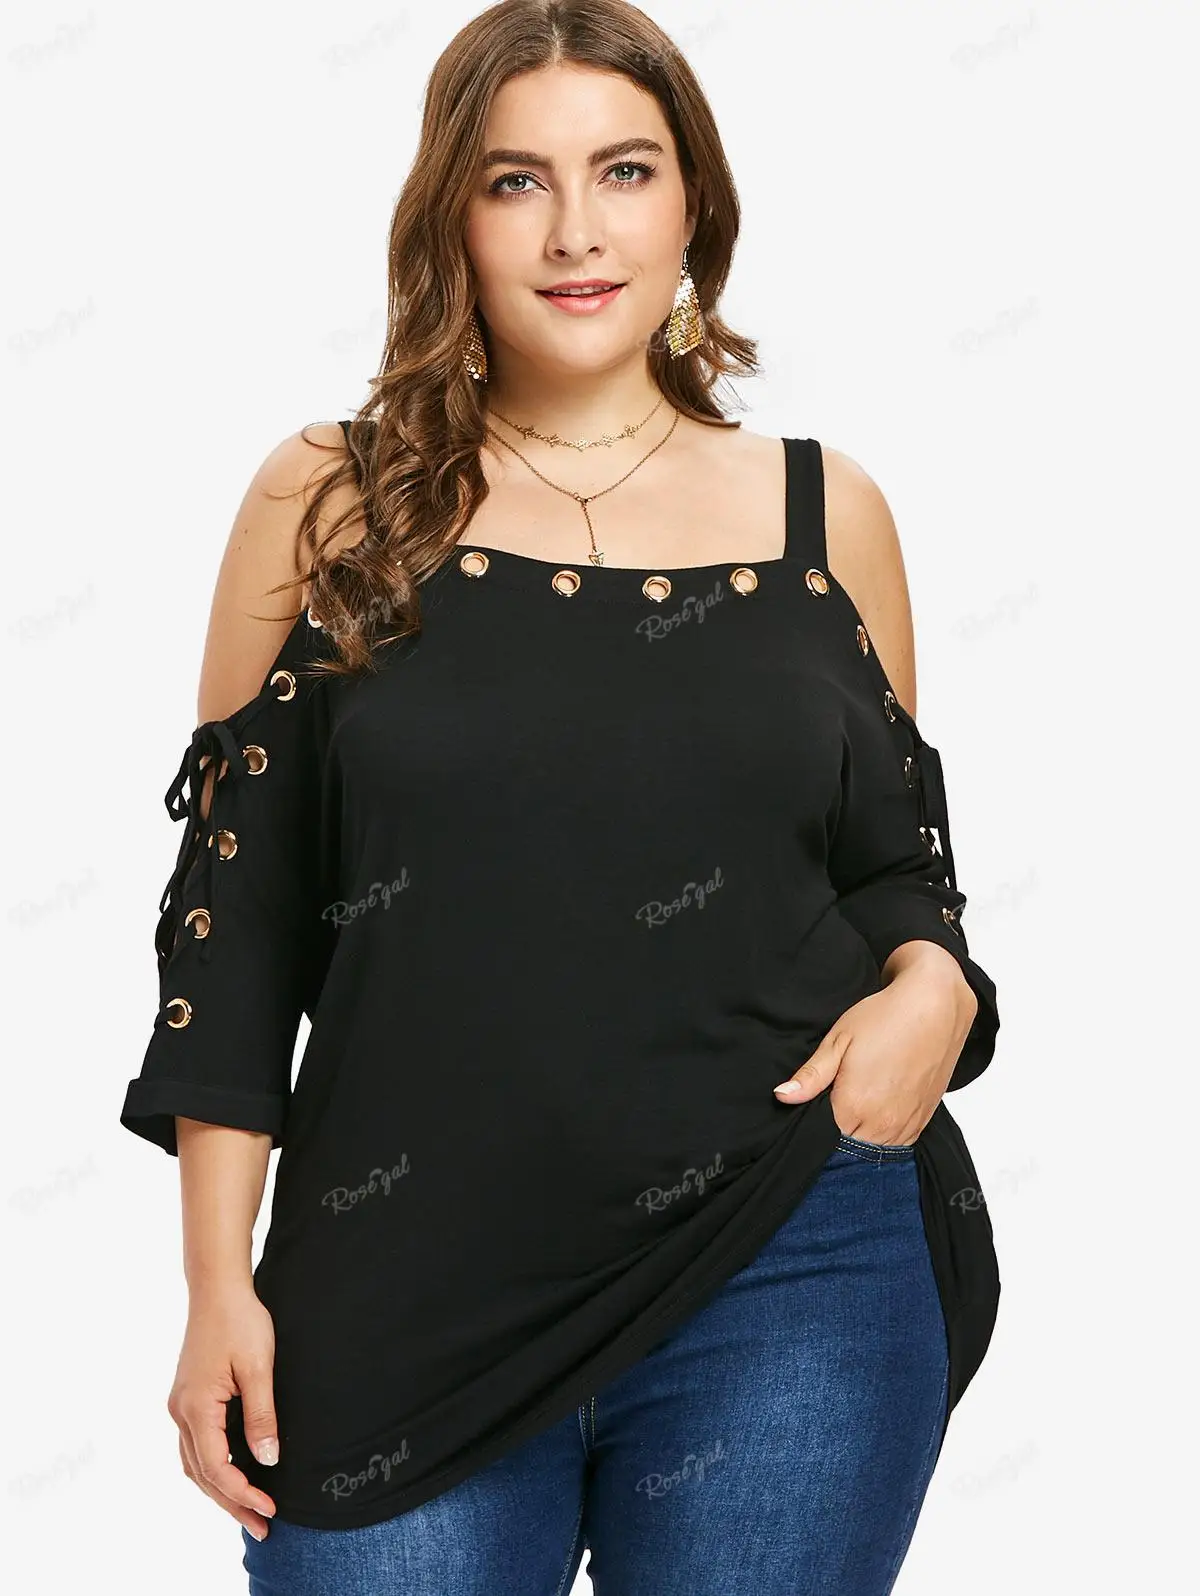 

ROSEGAL Plus Size Cold Shoulder Grommets Lace Up T-shirt 2023 New Women's Clothing Black Casual Strap Top